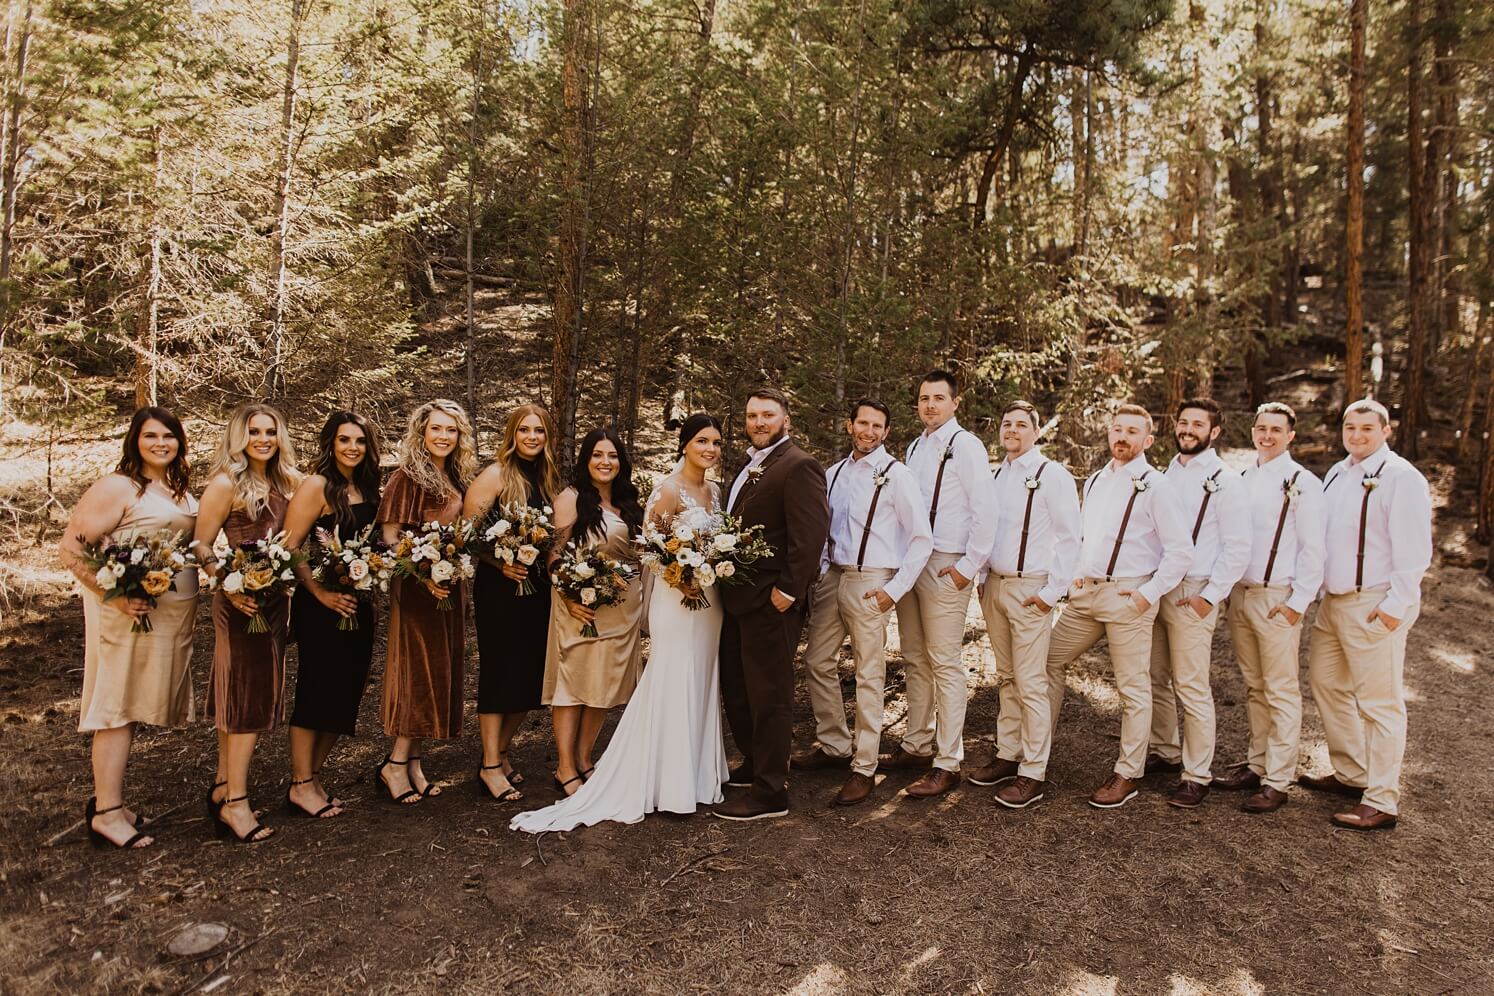 Bride and groom with wedding party in shades of brown | McArthur Weddings and Events